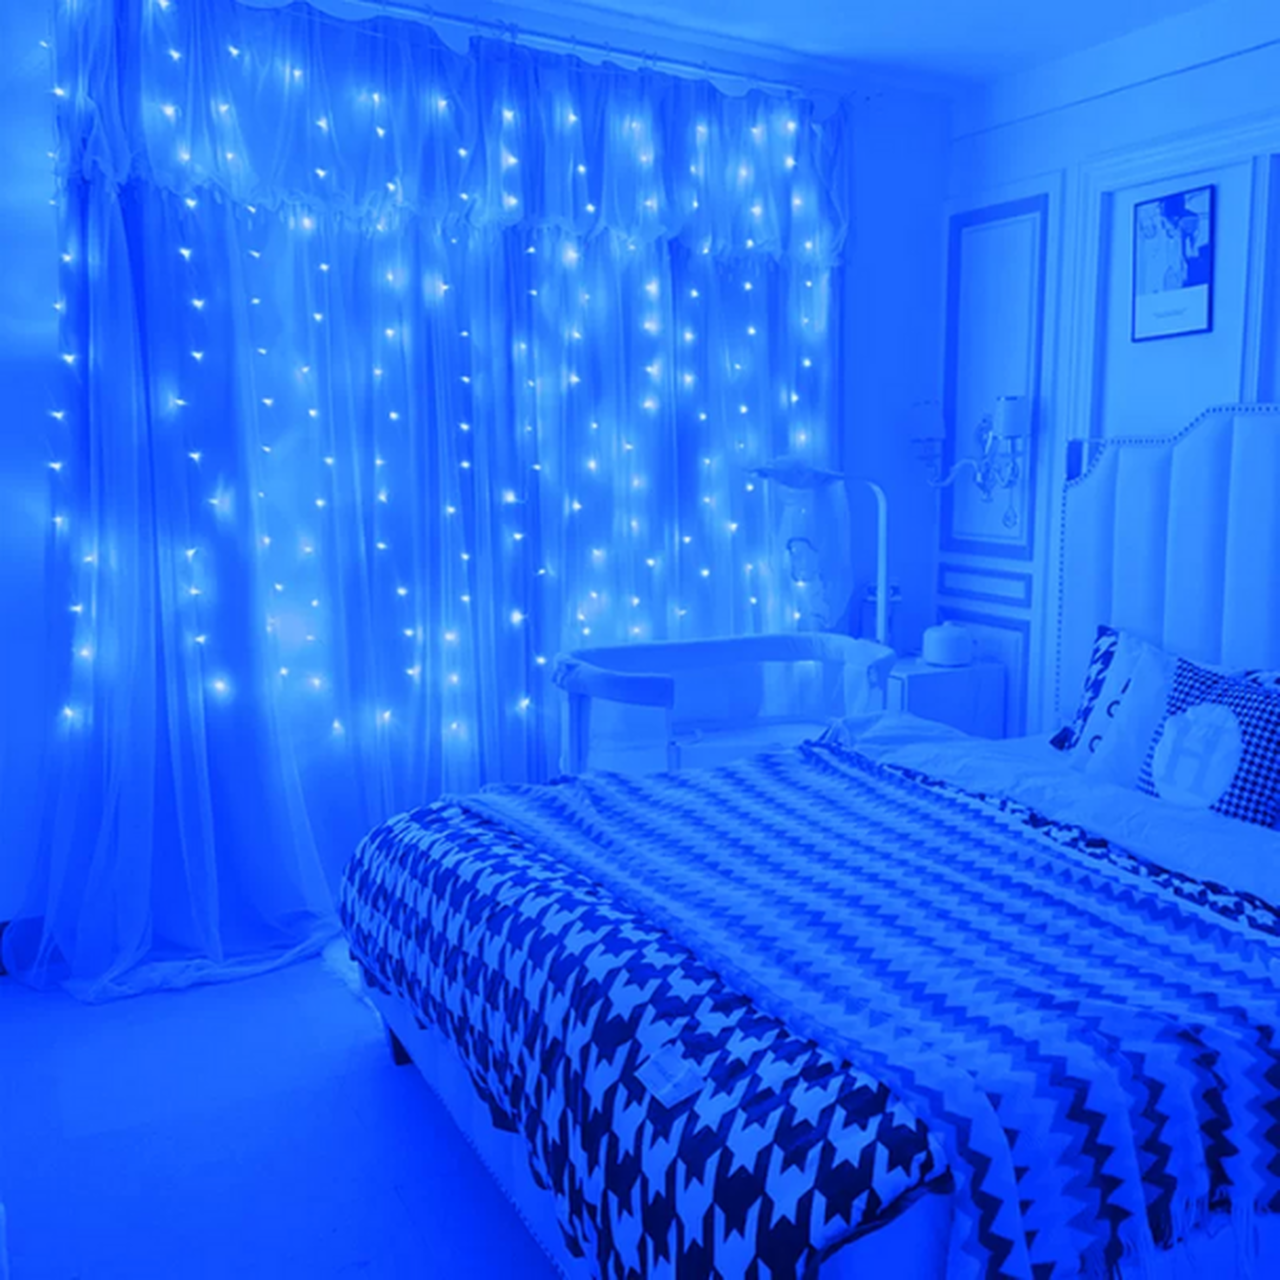 6x3 Meter Multi Color LED Curtain Lights, Blue Color with Waterfall/Snowing Effect, Waterproof 